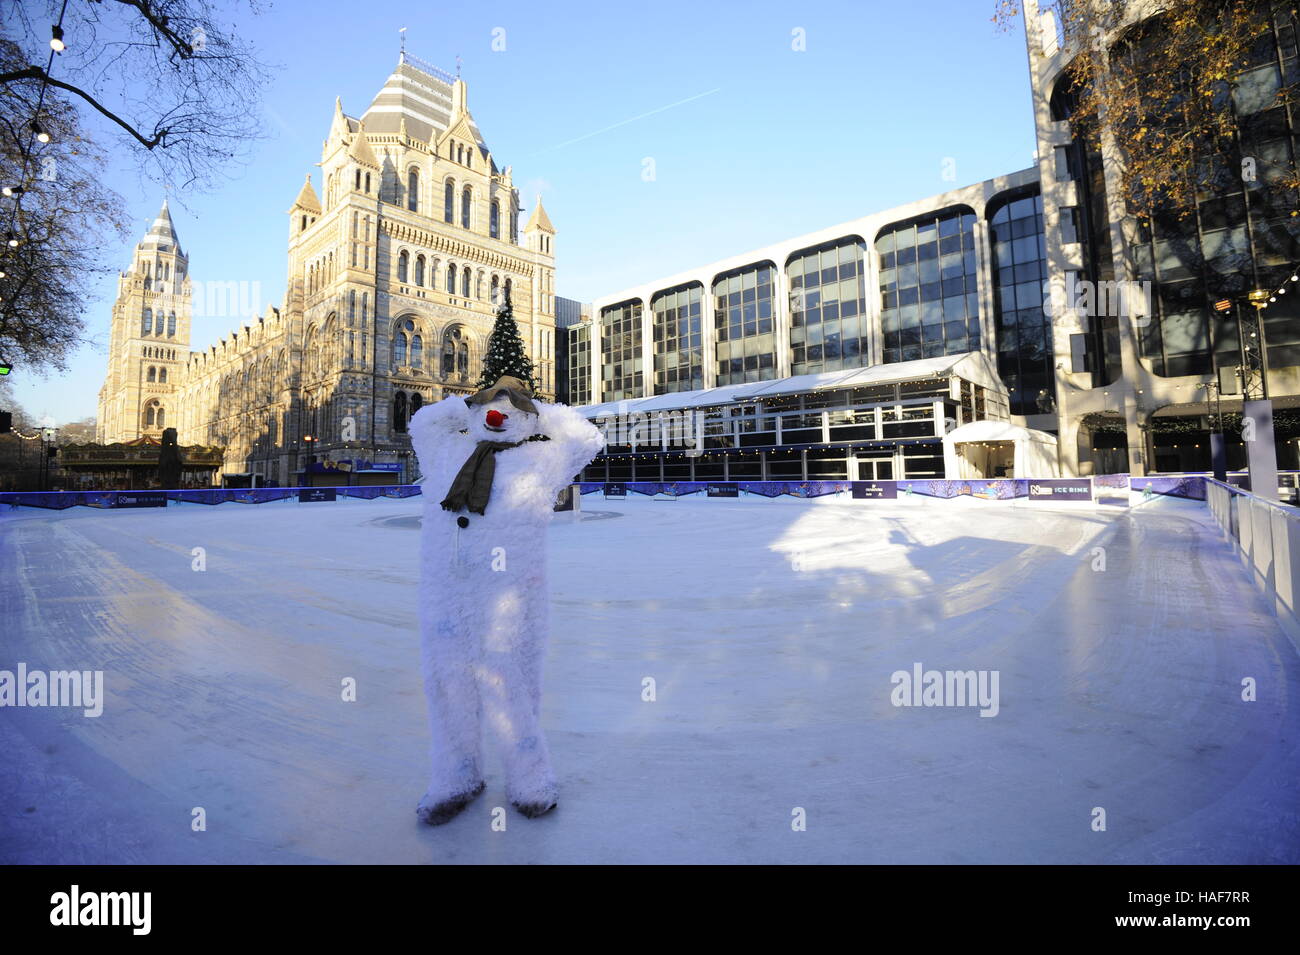 An actor plays The Snowman during a photo call at the Natural History Museum Ice Rink for the theatre production of The Snowman, running at the Peacock Theatre in London. Stock Photo